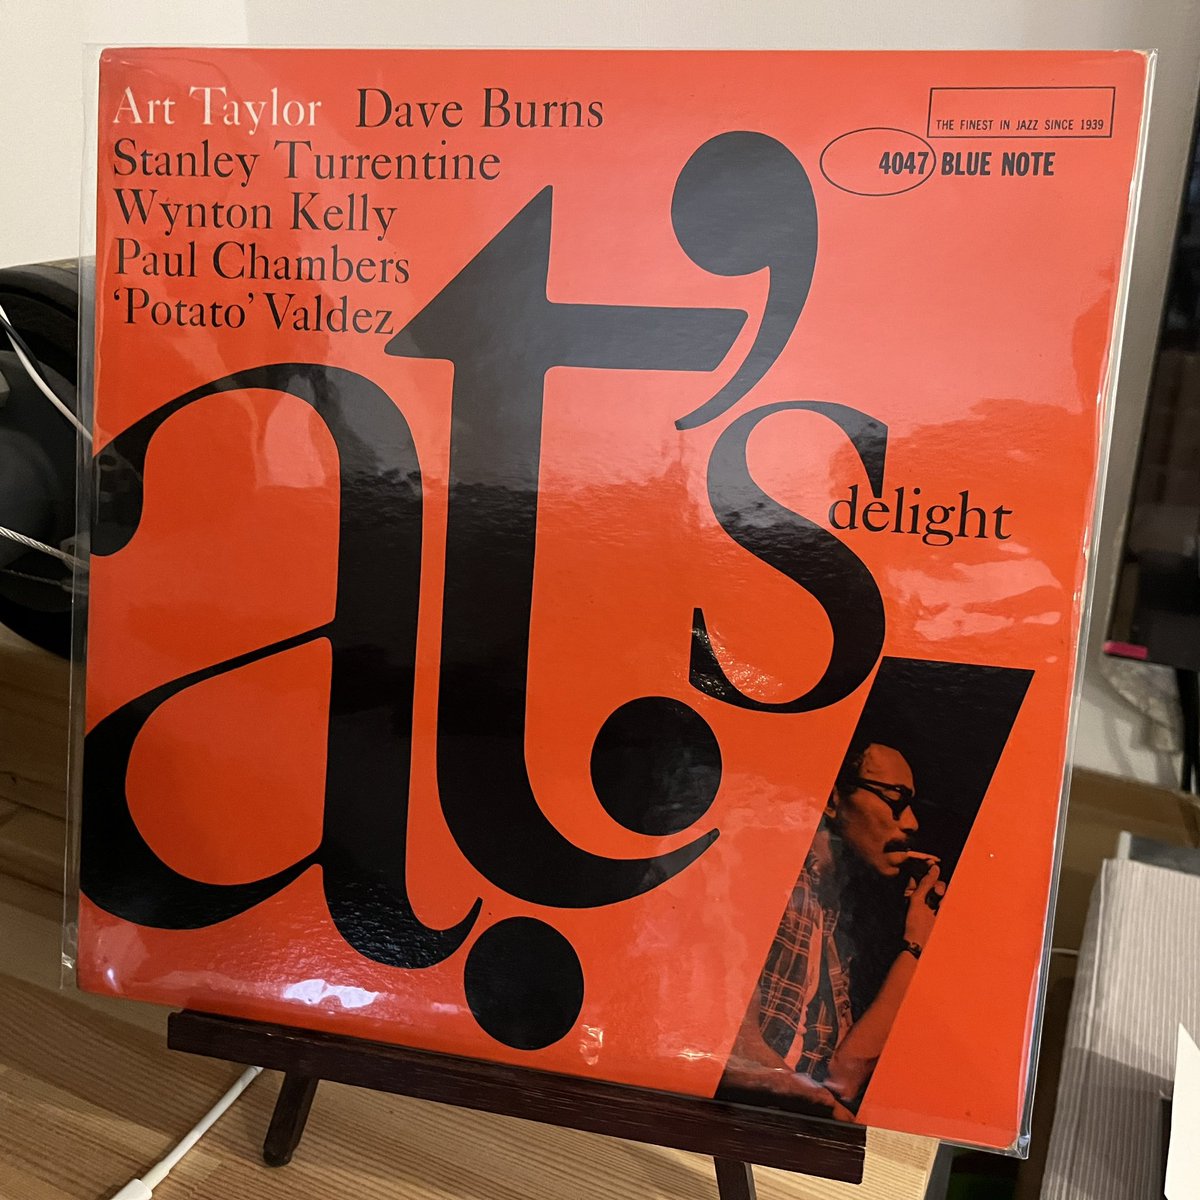 #NowPlaying #jazz
Art Taylor
a.t.’s delight

お気に入り、アートテイラーのリーダー作◎